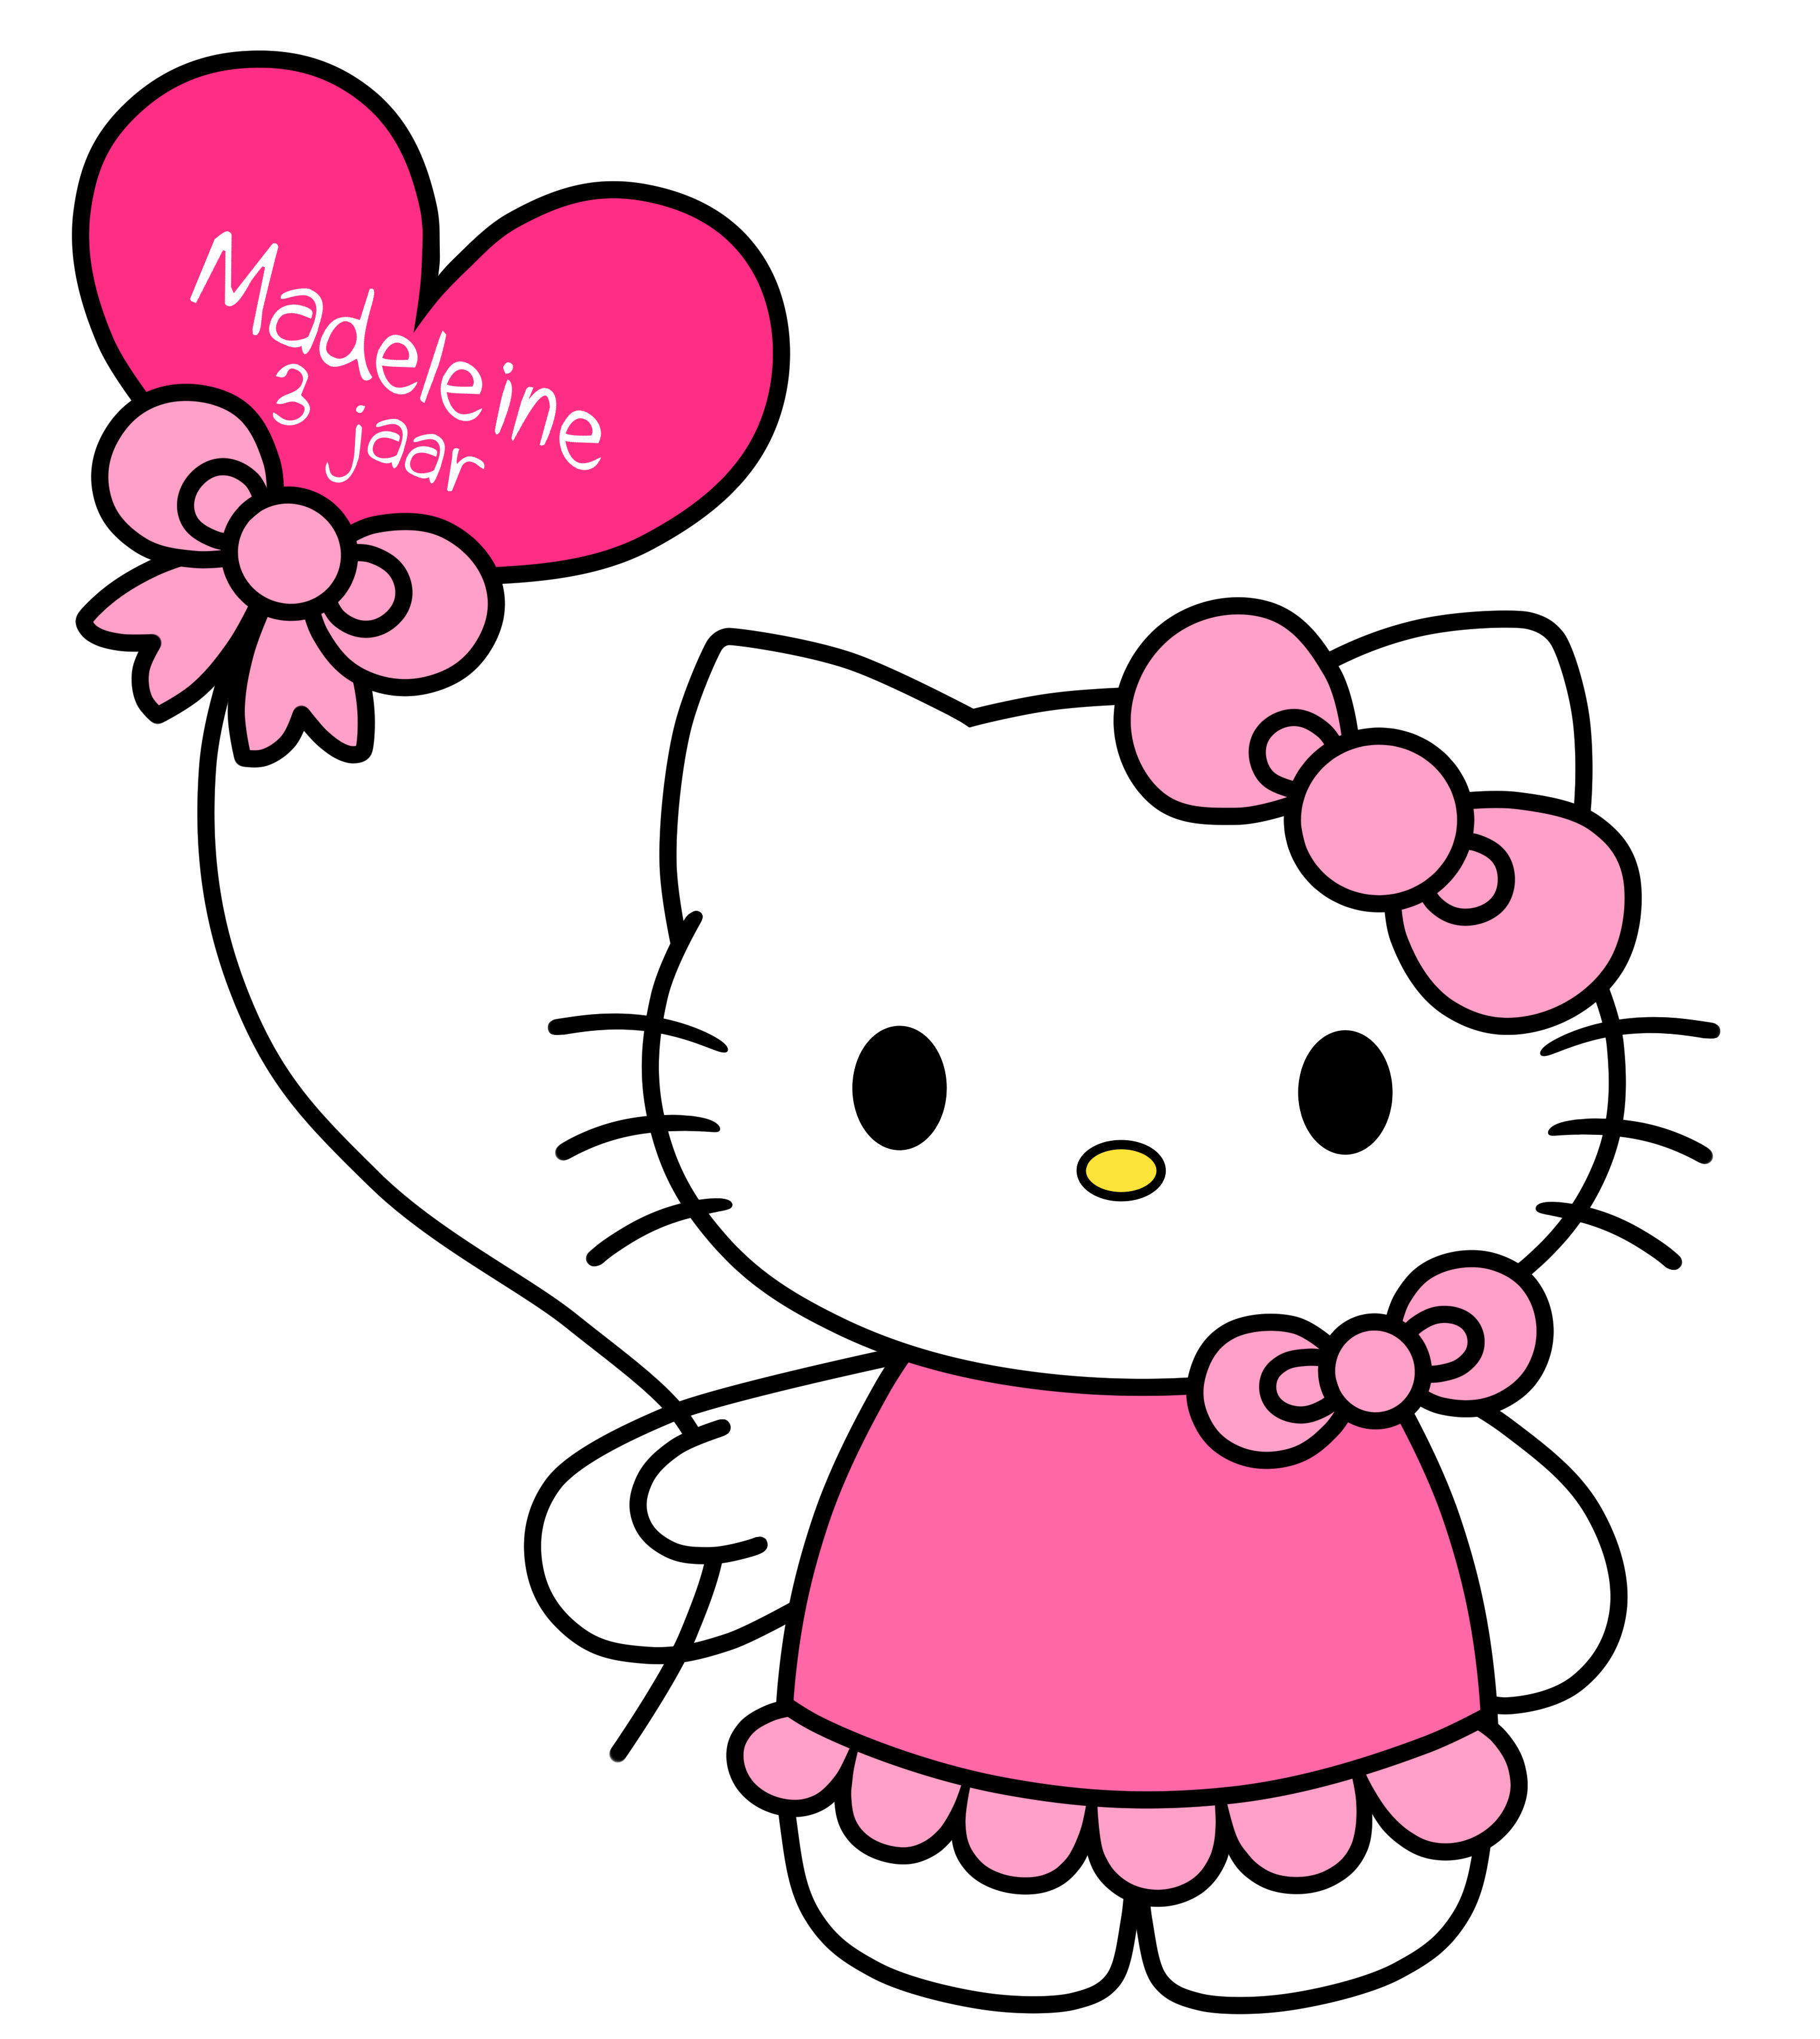 Free Hello Kitty With Balloons Png, Download Free Clip Art.